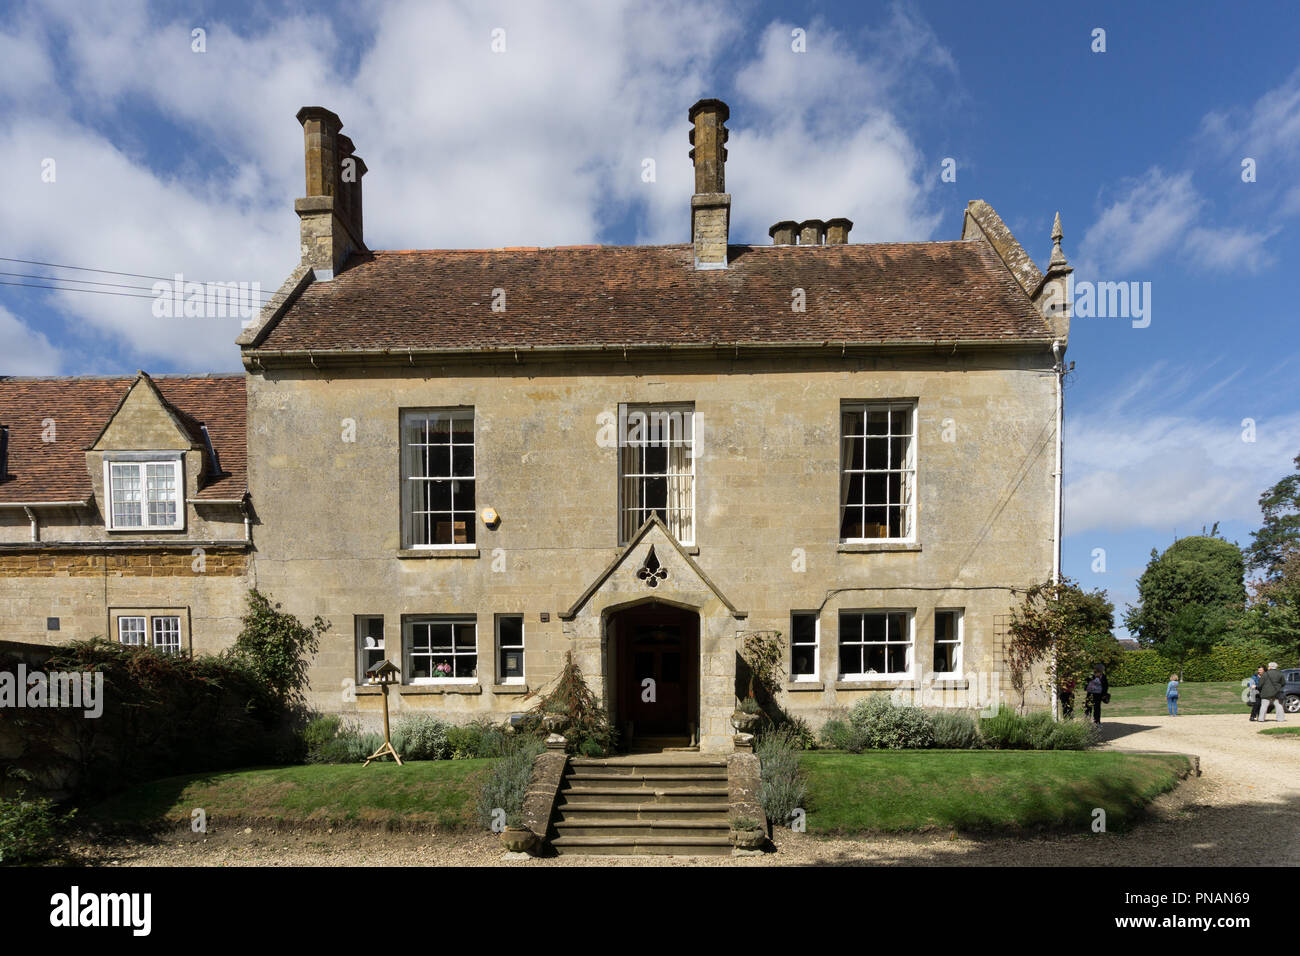 Weston Hall, a late 17th century house and home to the famous literary Sitwell family since 1714; Weston, Northamptonshire, UK Stock Photo